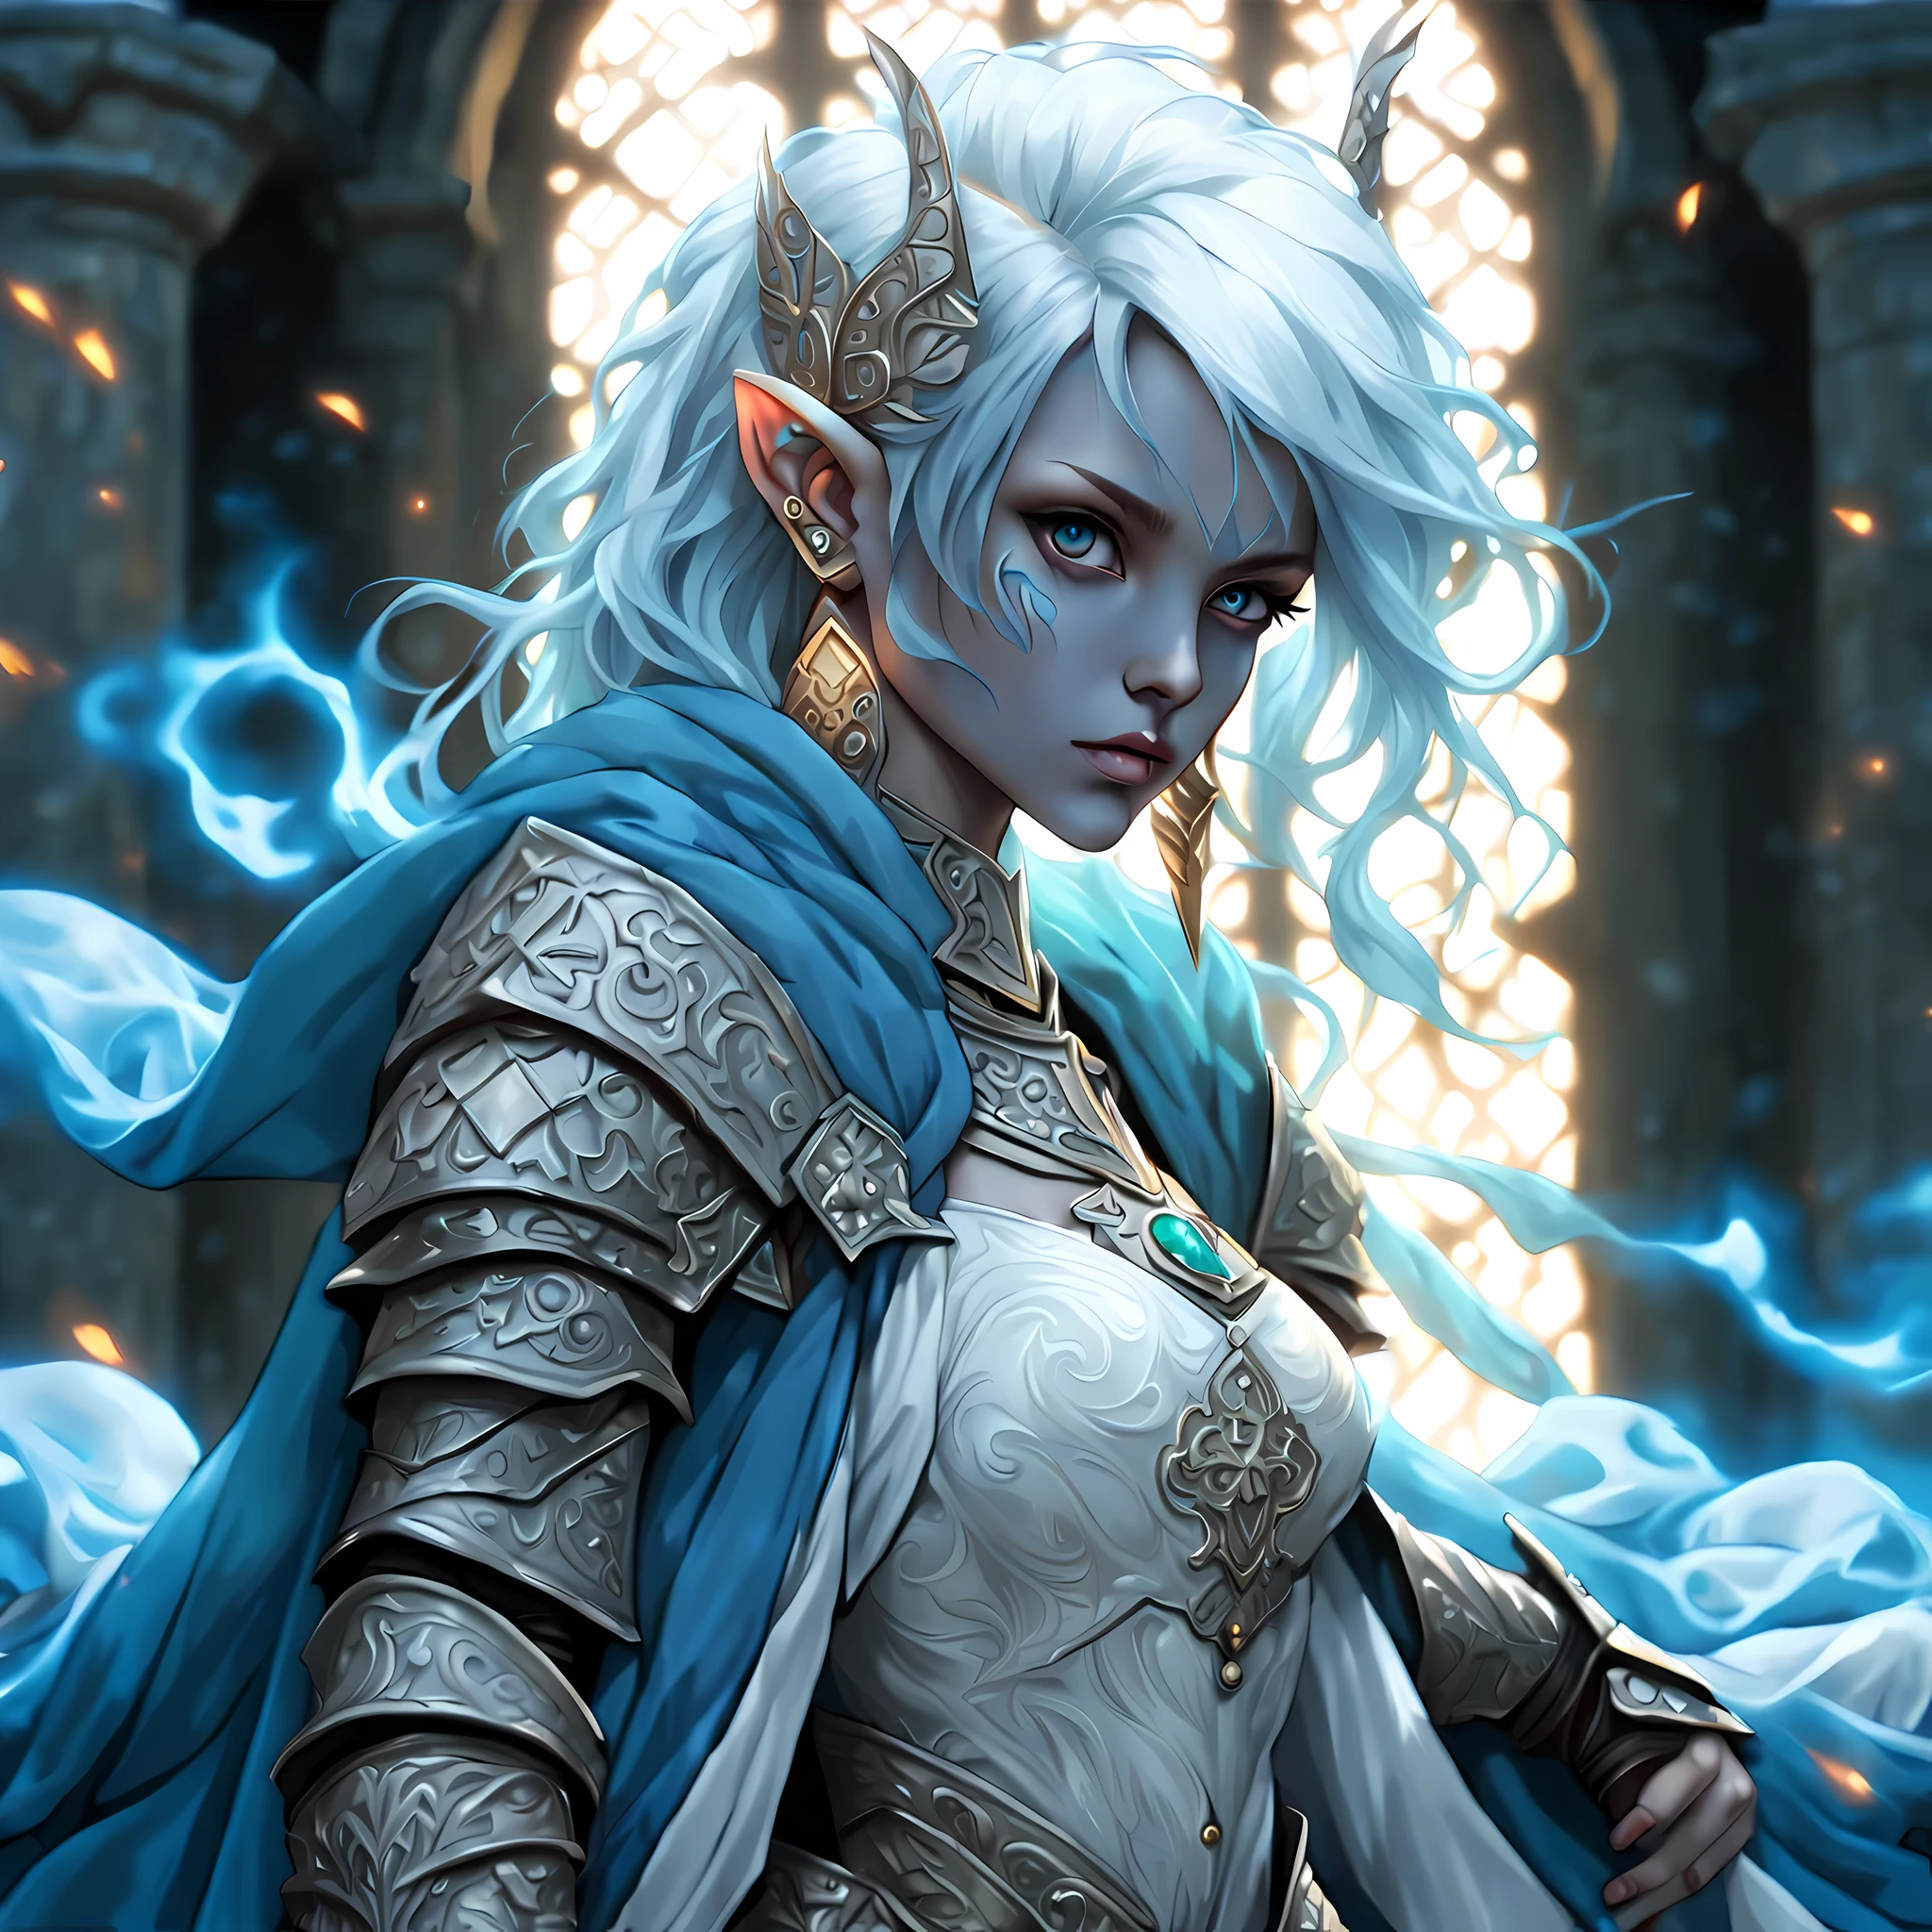 fantasy art, dnd art, RPG art, wide shot, (masterpiece: 1.4) a (portrait: 1.3) intense details, highly detailed, photorealistic, best quality, highres, portrait a female (fantasy art, Masterpiece, best quality: 1.3) ((blue skin: 1.5)), intense details facial details, exquisite beauty, (fantasy art, Masterpiece, best quality) cleric, (blue: 1.3) skinned female, (white hair: 1.3), bald head (green: 1.3) eye, fantasy art, Masterpiece, best quality) armed a fiery sword red fire, wearing heavy (white: 1.3) half plate mail armor, wearing high heeled laced boots, wearing an(orange :1.3) cloak, wearing glowing holy symbol GlowingRunes_yellow, within fantasy temple background, action shot reflection light, high details, best quality, 16k, [ultra detailed], masterpiece, best quality, (extremely detailed), close up, ultra wide shot, photorealistic, RAW, fantasy art, dnd art, fantasy art, realistic art,((best quality)), ((masterpiece)), (detailed), perfect face, ((no ears: 1.6))